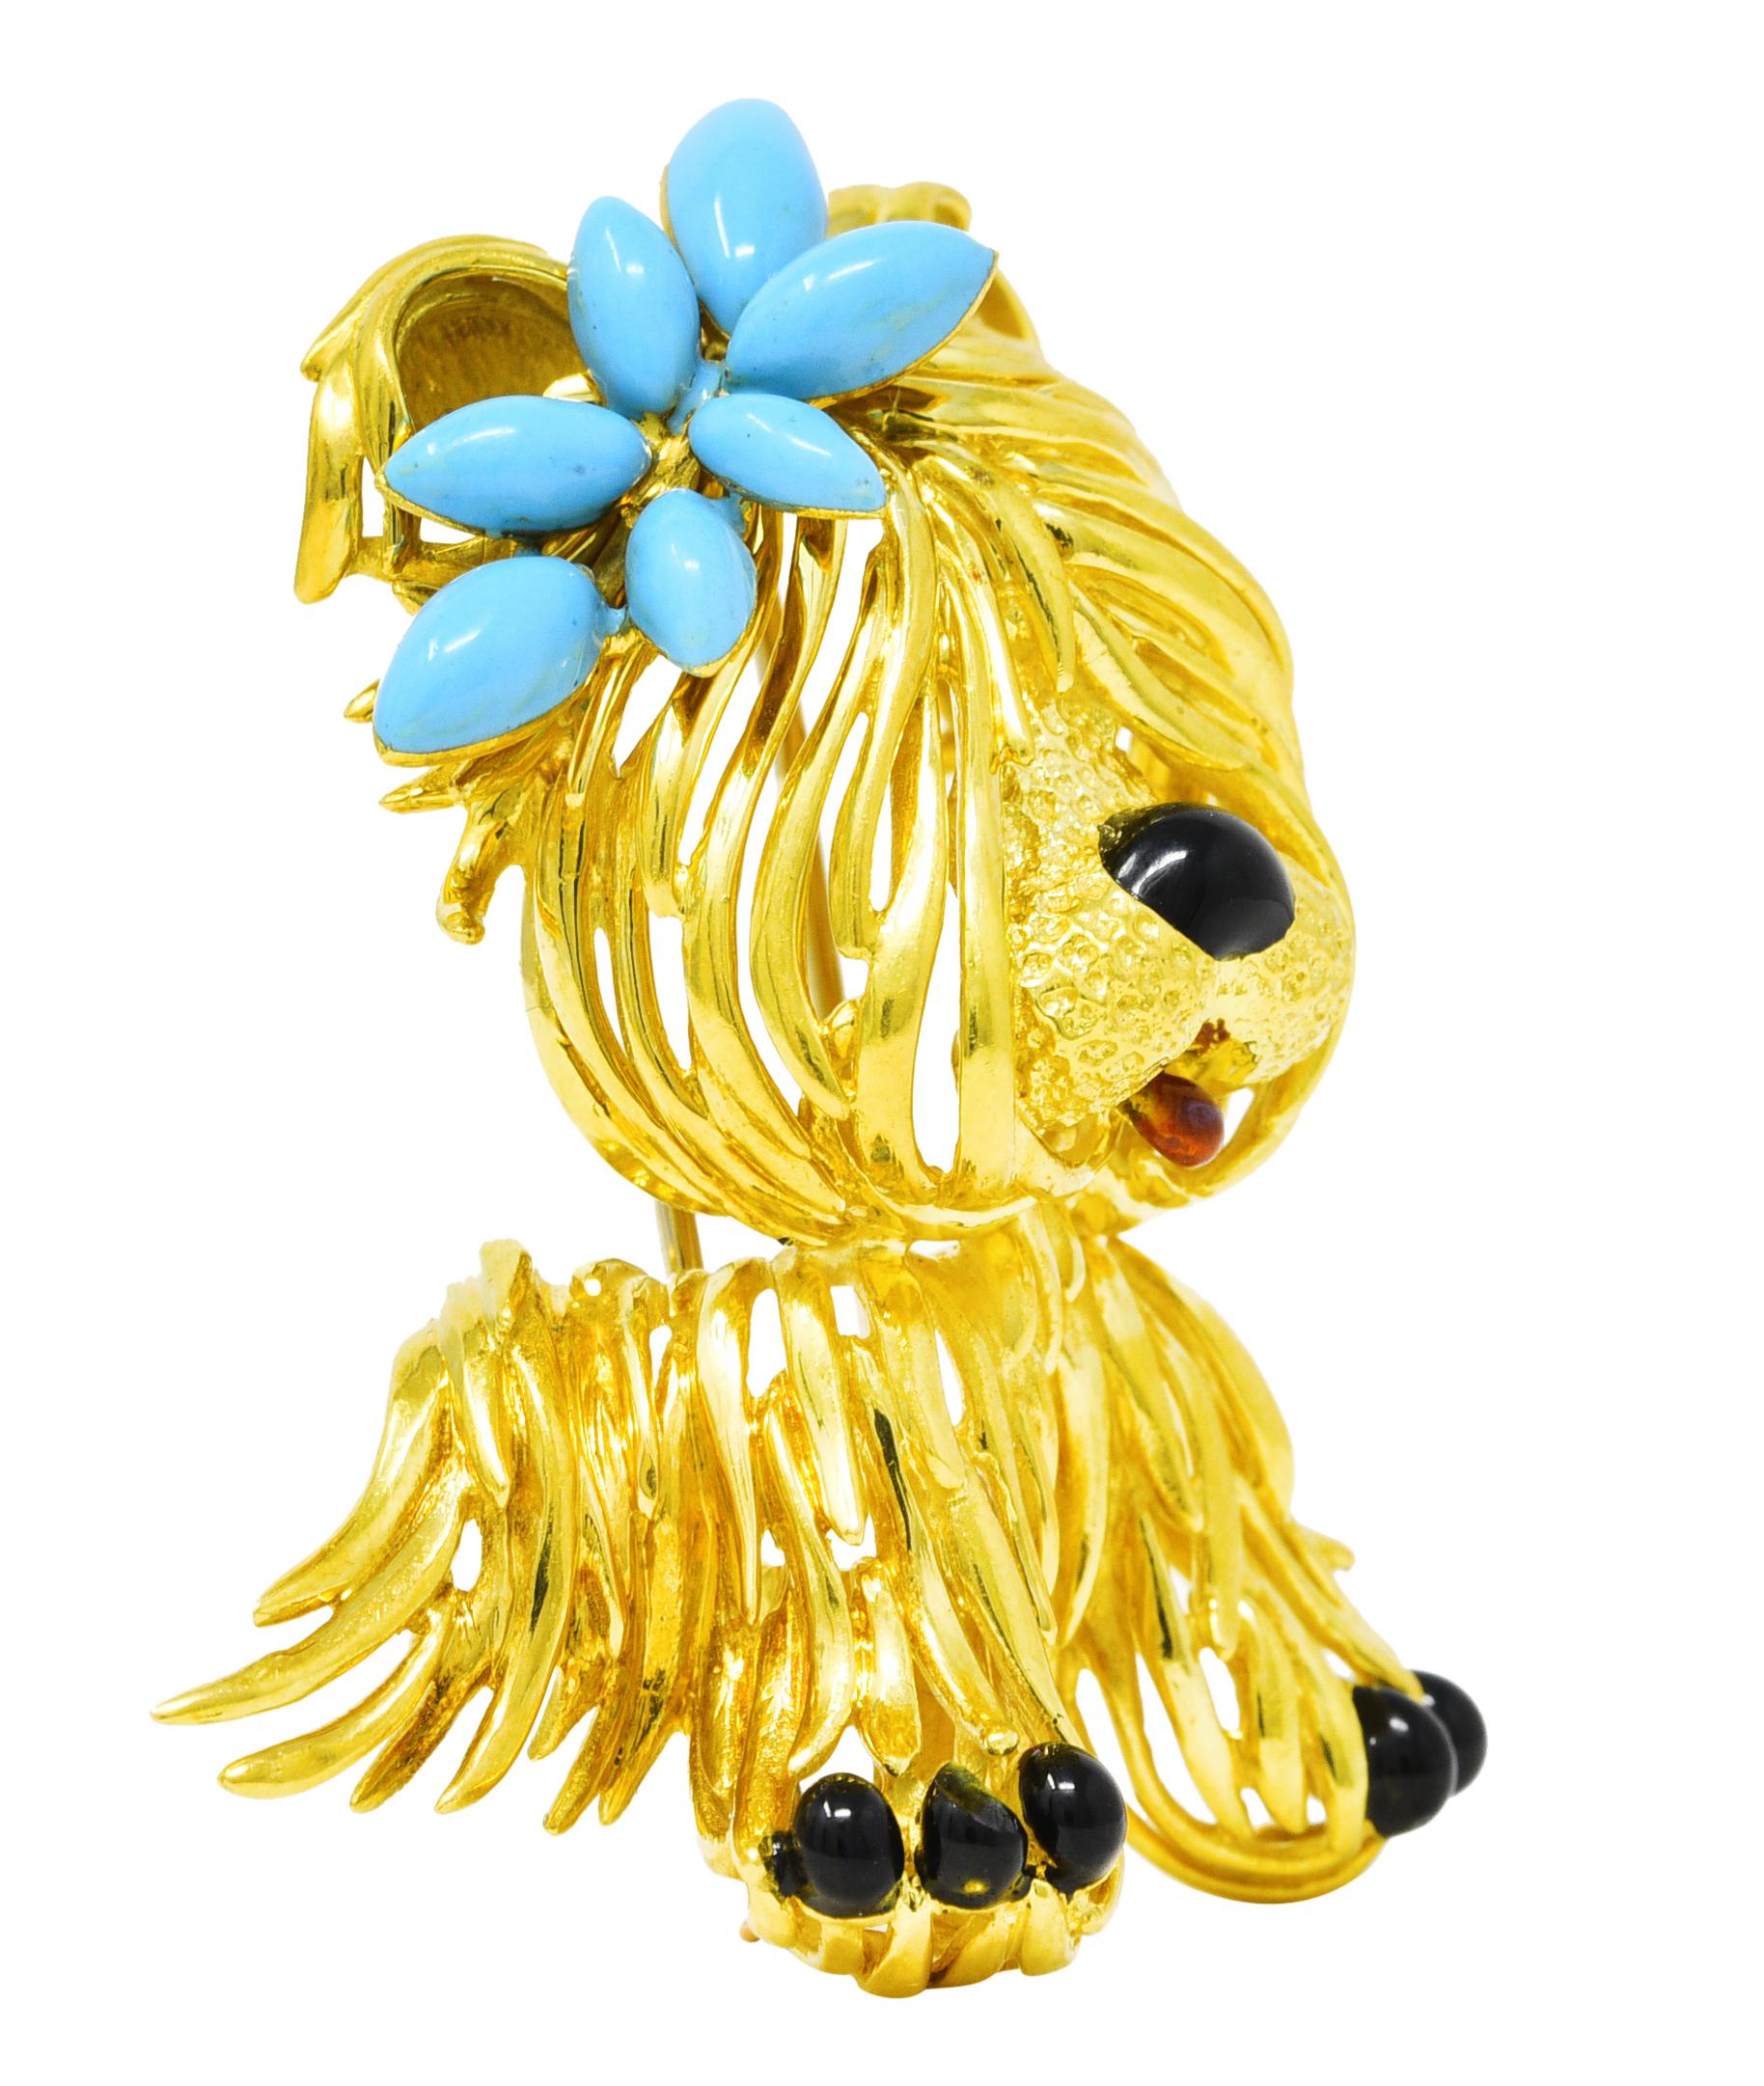 Substantial brooch is a dimensionally formed Maltese dog with stylized polished gold fur. Muzzle is stippled gold with a guilloche enamel tongue. With an opaque black enamel nose matched paws. Dog is topped by a clustered floral bow glossed with